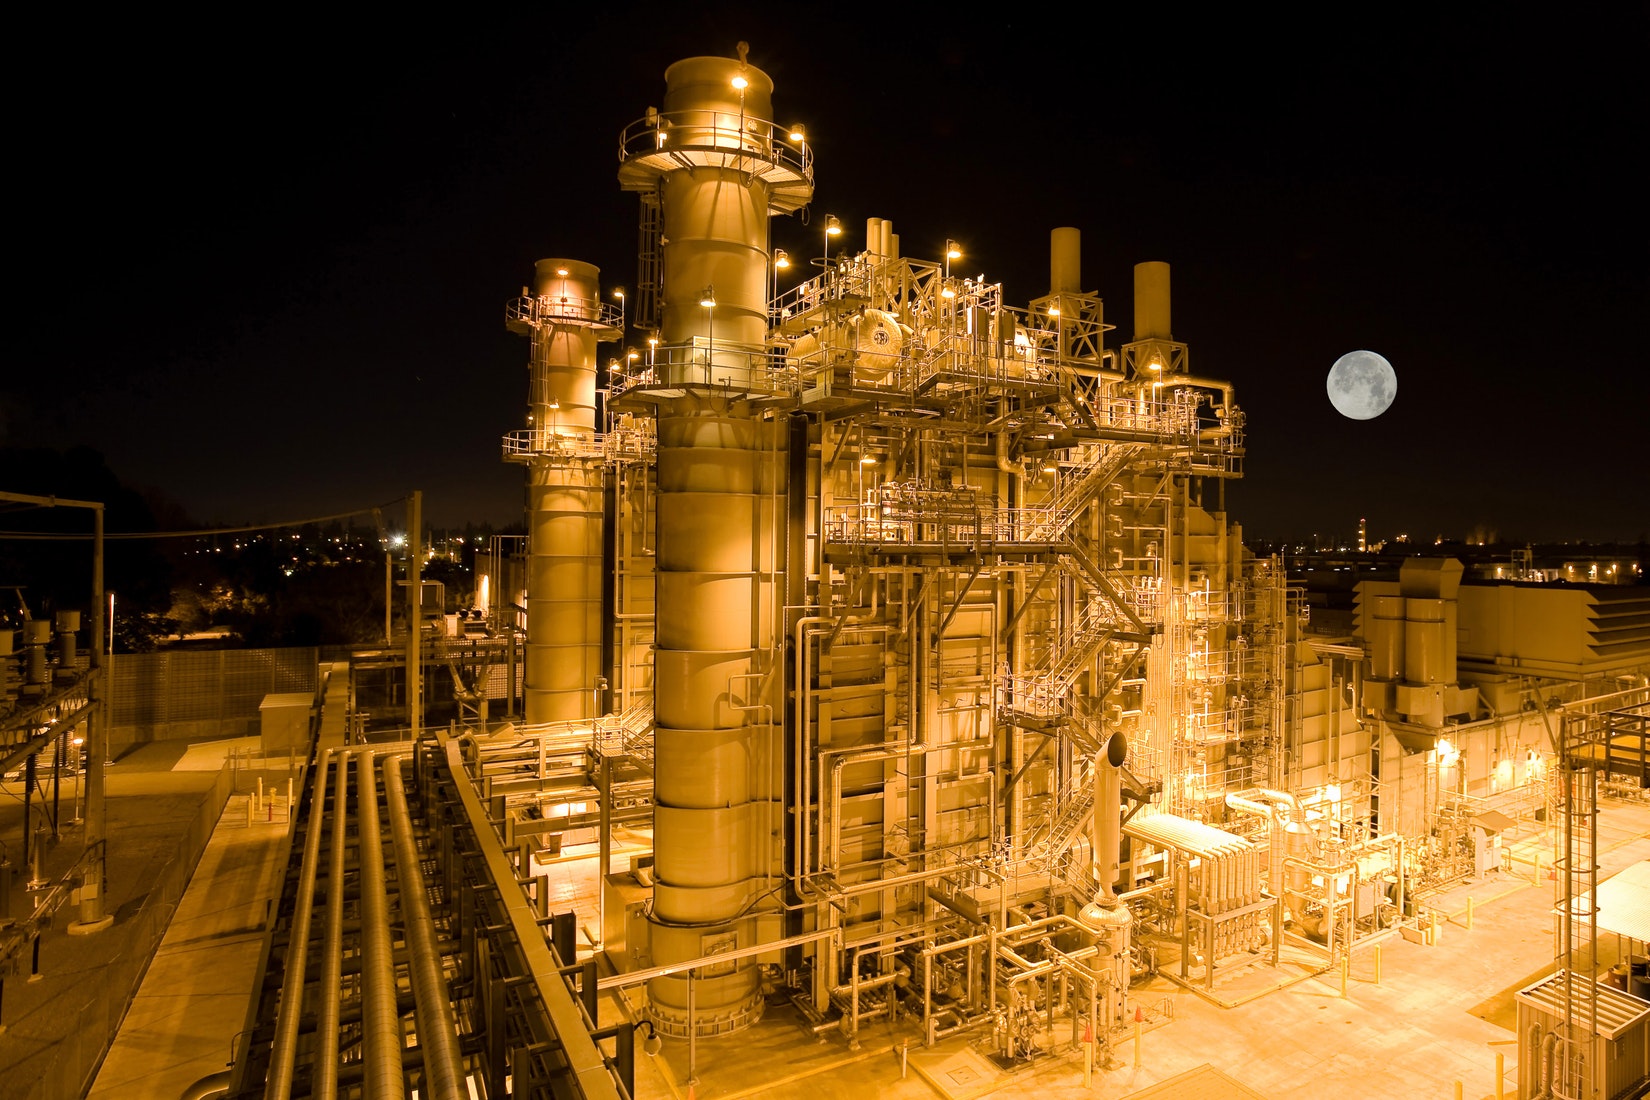 Natural gas plant at night with moon